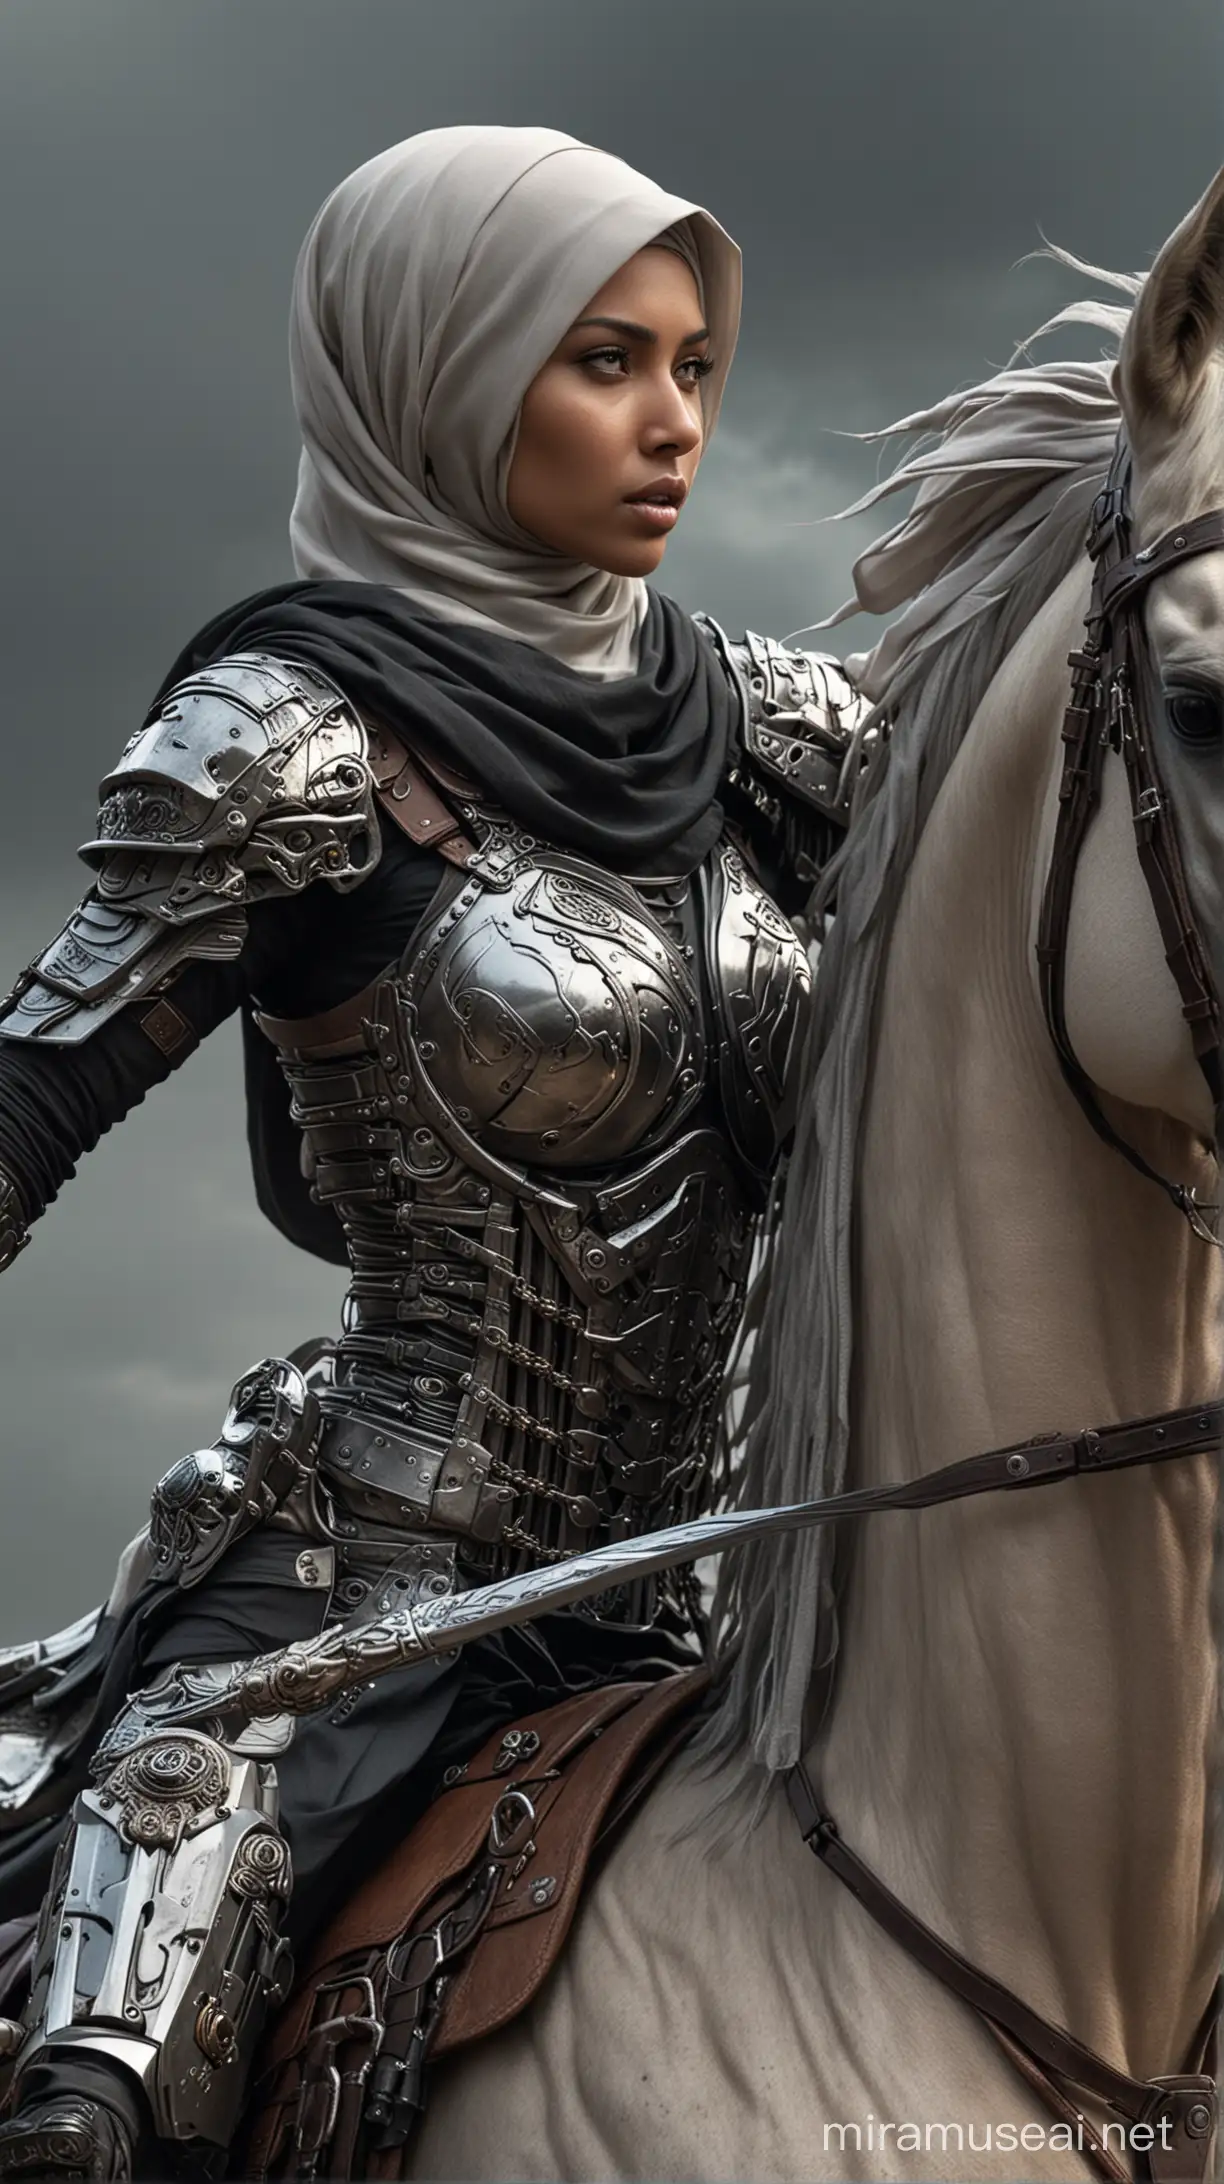 Close up,3/4 quarter angle,a biomechanical warrior woman with hijab rising a sword in her hand on a biomechanical horse.Electronic, Photo realistic,dark apocalypses battle field backdrop, cinematic, HDR.